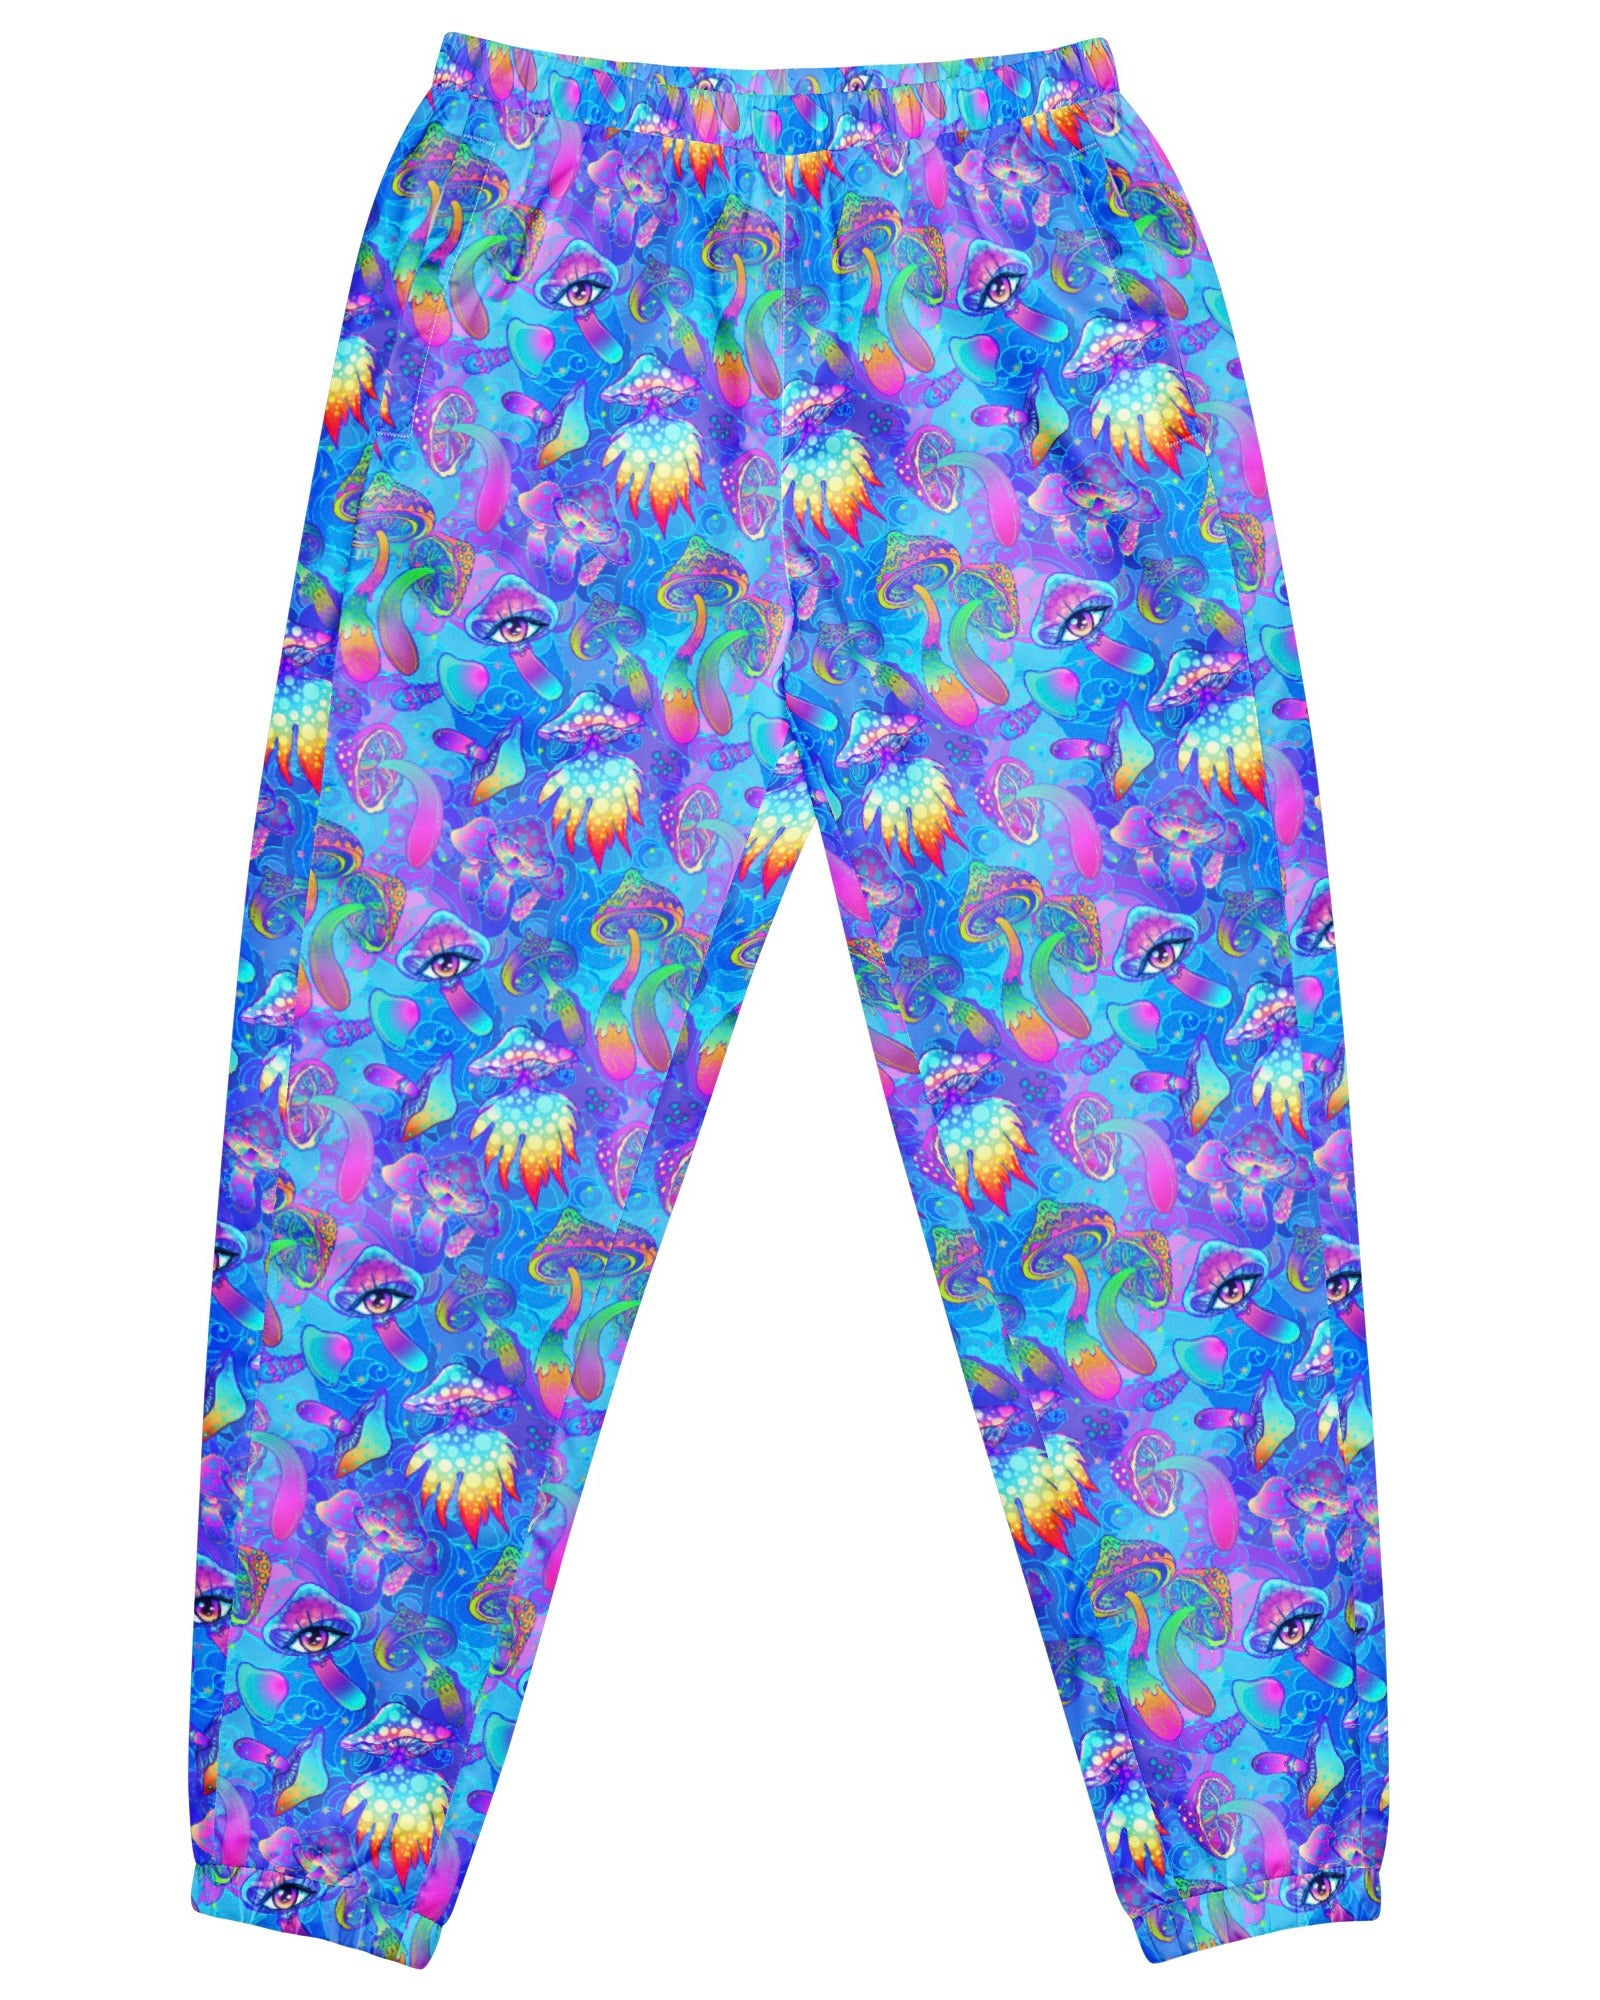 Shroomin Blue Track Pants, Track Pants, - One Stop Rave